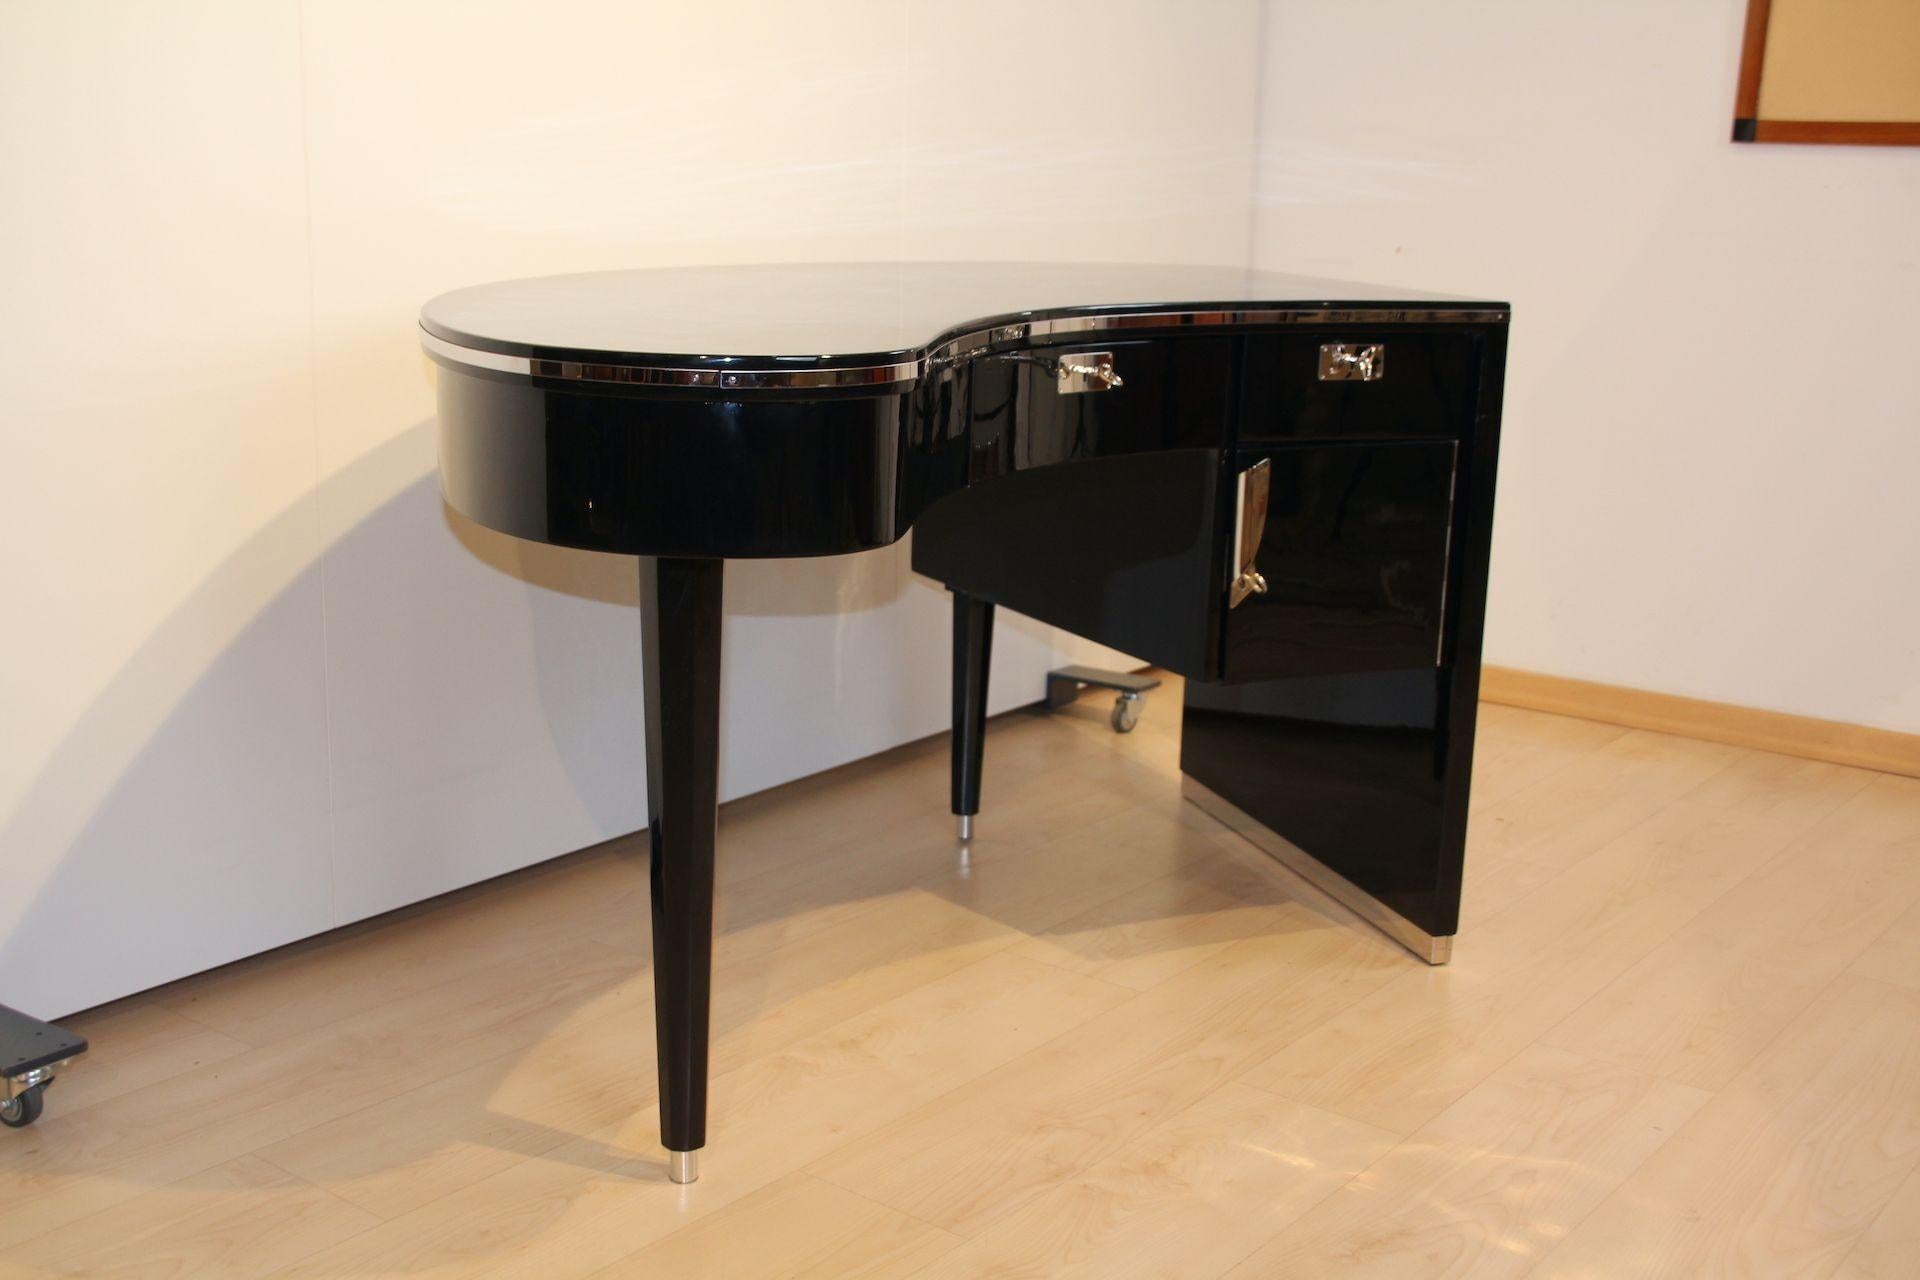 Design Desk, Curved Top, Piano Lacquer, Chrome, France, 1950s For Sale 1